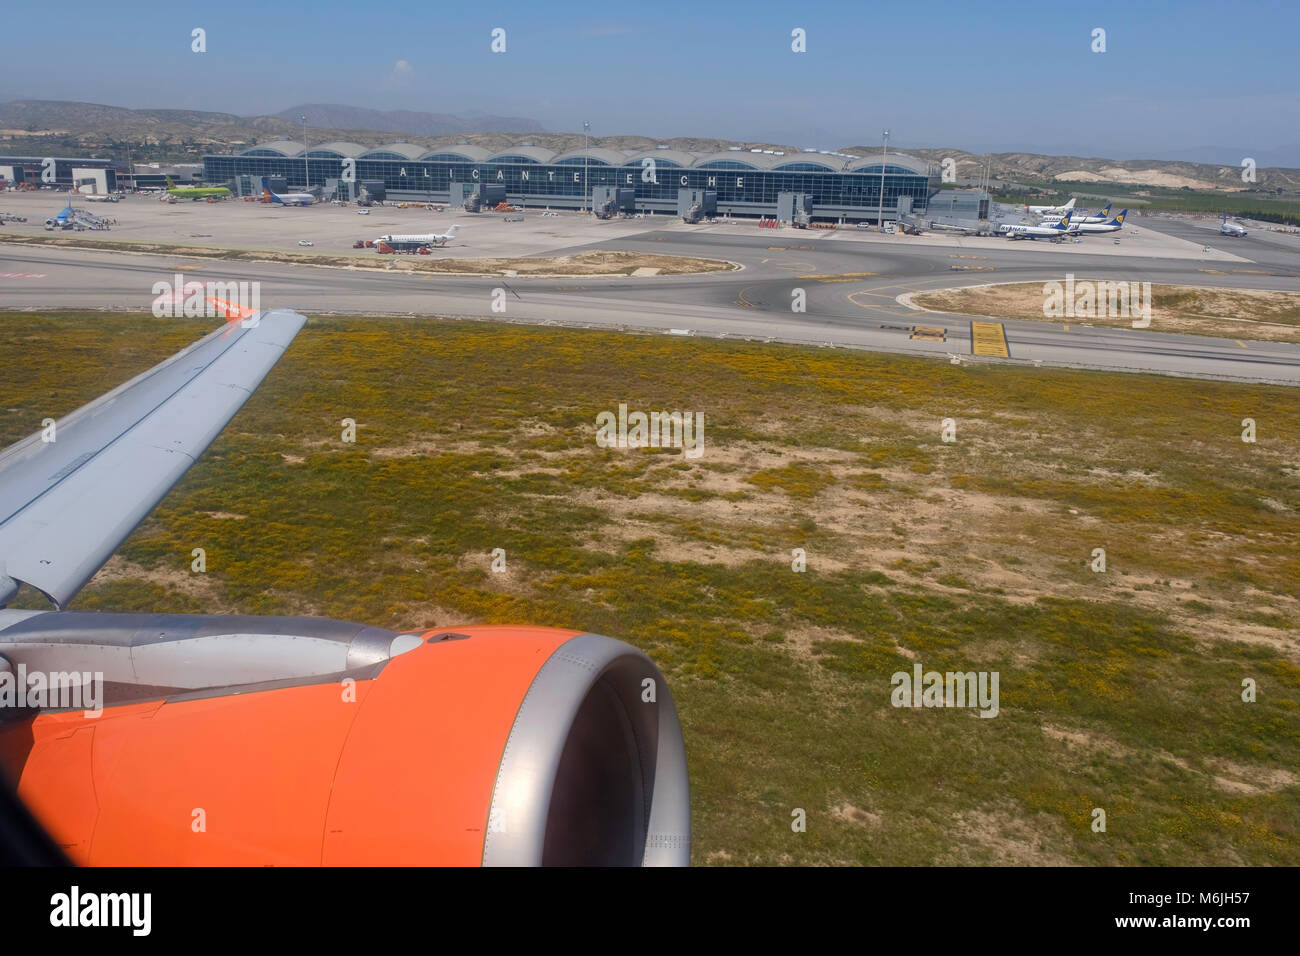 View from aircraft of engine and part of Alicante airport, Spain. Stock Photo